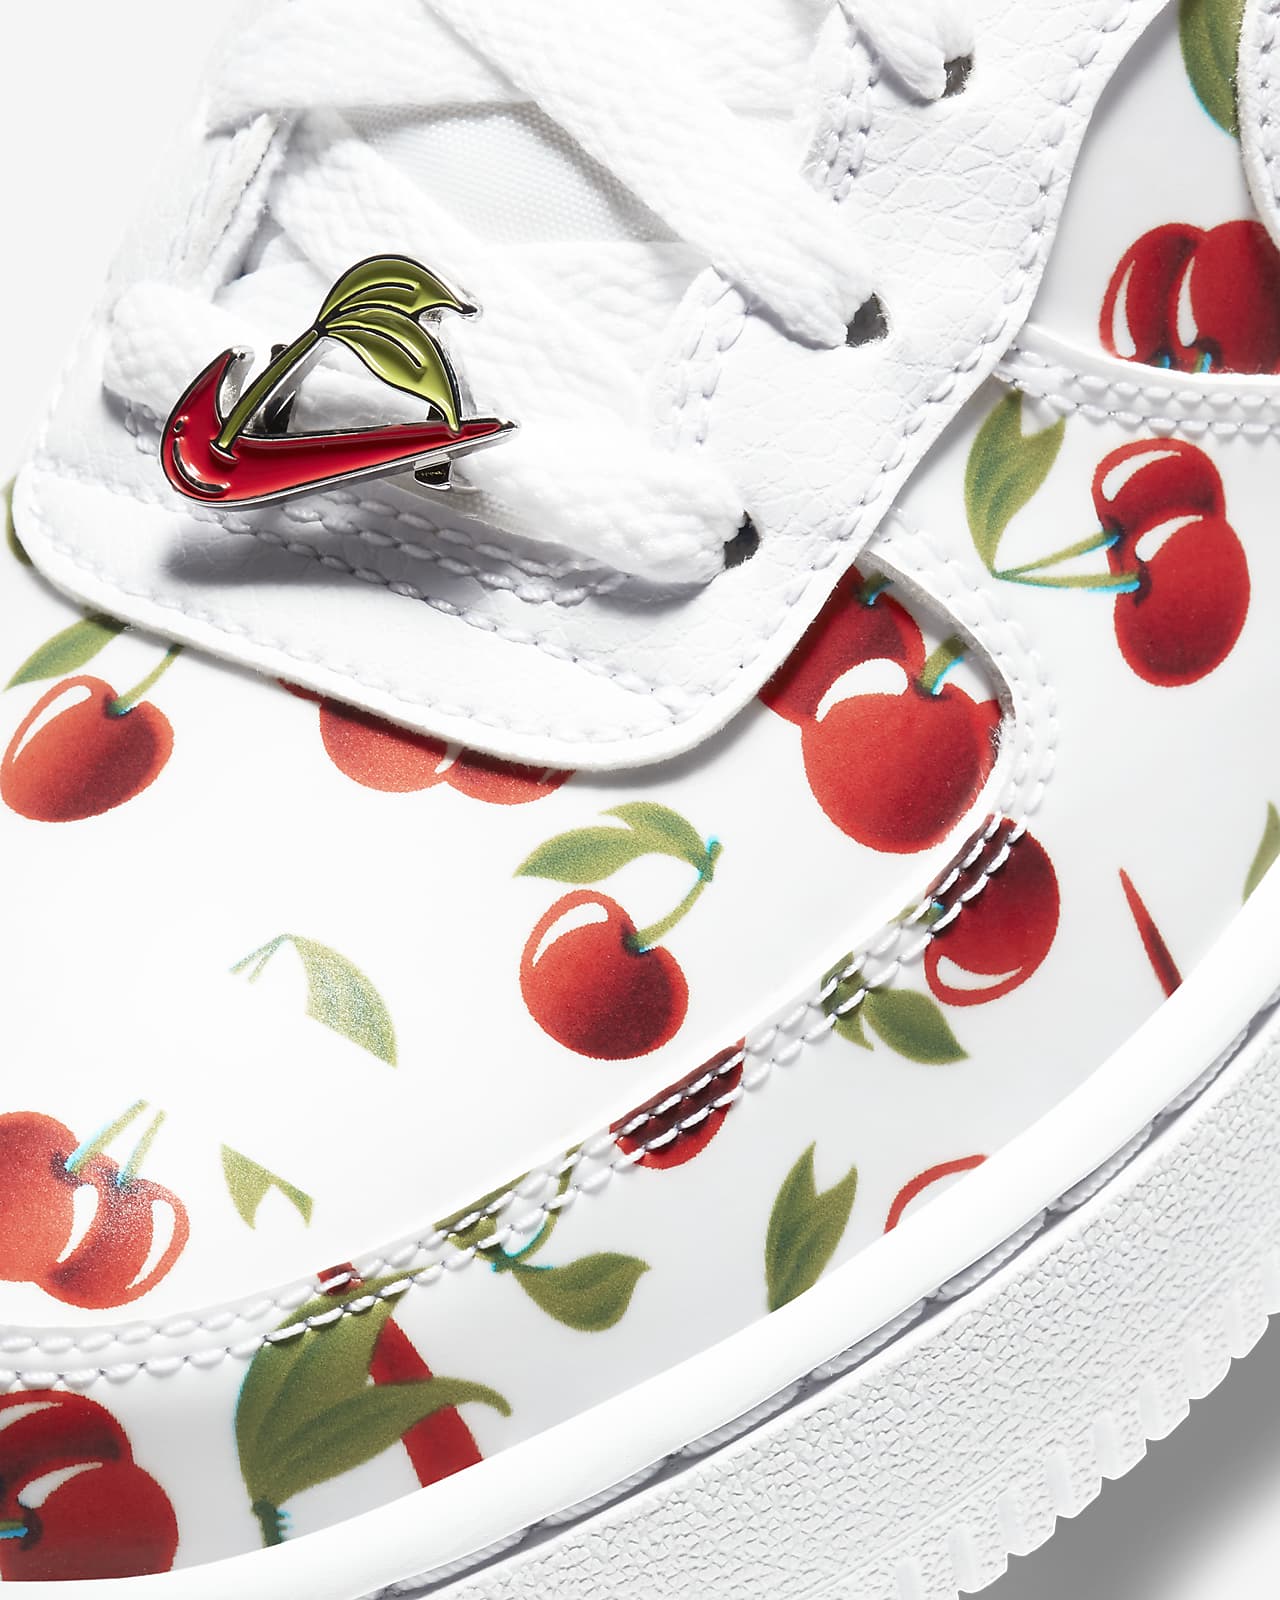 air force 1 with cherries